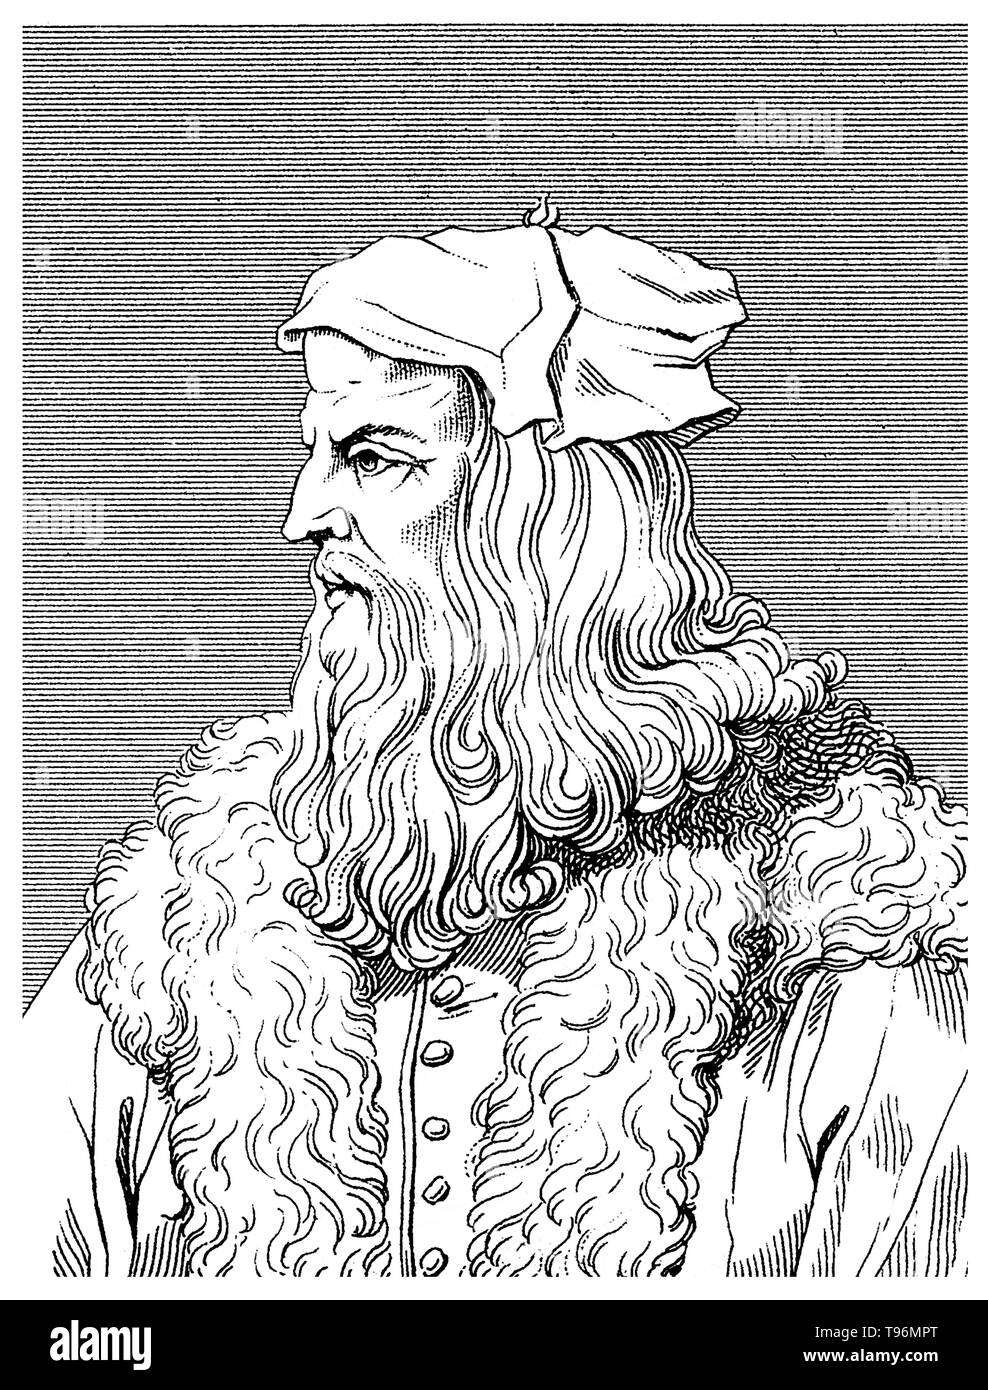 Leonardo di ser Piero da Vinci (April 15, 1452 - May 2, 1519) was an Italian Renaissance polymath: painter, sculptor, architect, musician, mathematician, engineer, inventor, anatomist, geologist, cartographer, botanist, and writer. His genius, perhaps more than that of any other figure, epitomized the Renaissance humanist ideal, often been described as the archetype of the Renaissance Man.  Line engraving by George Cooke, undated. Stock Photo